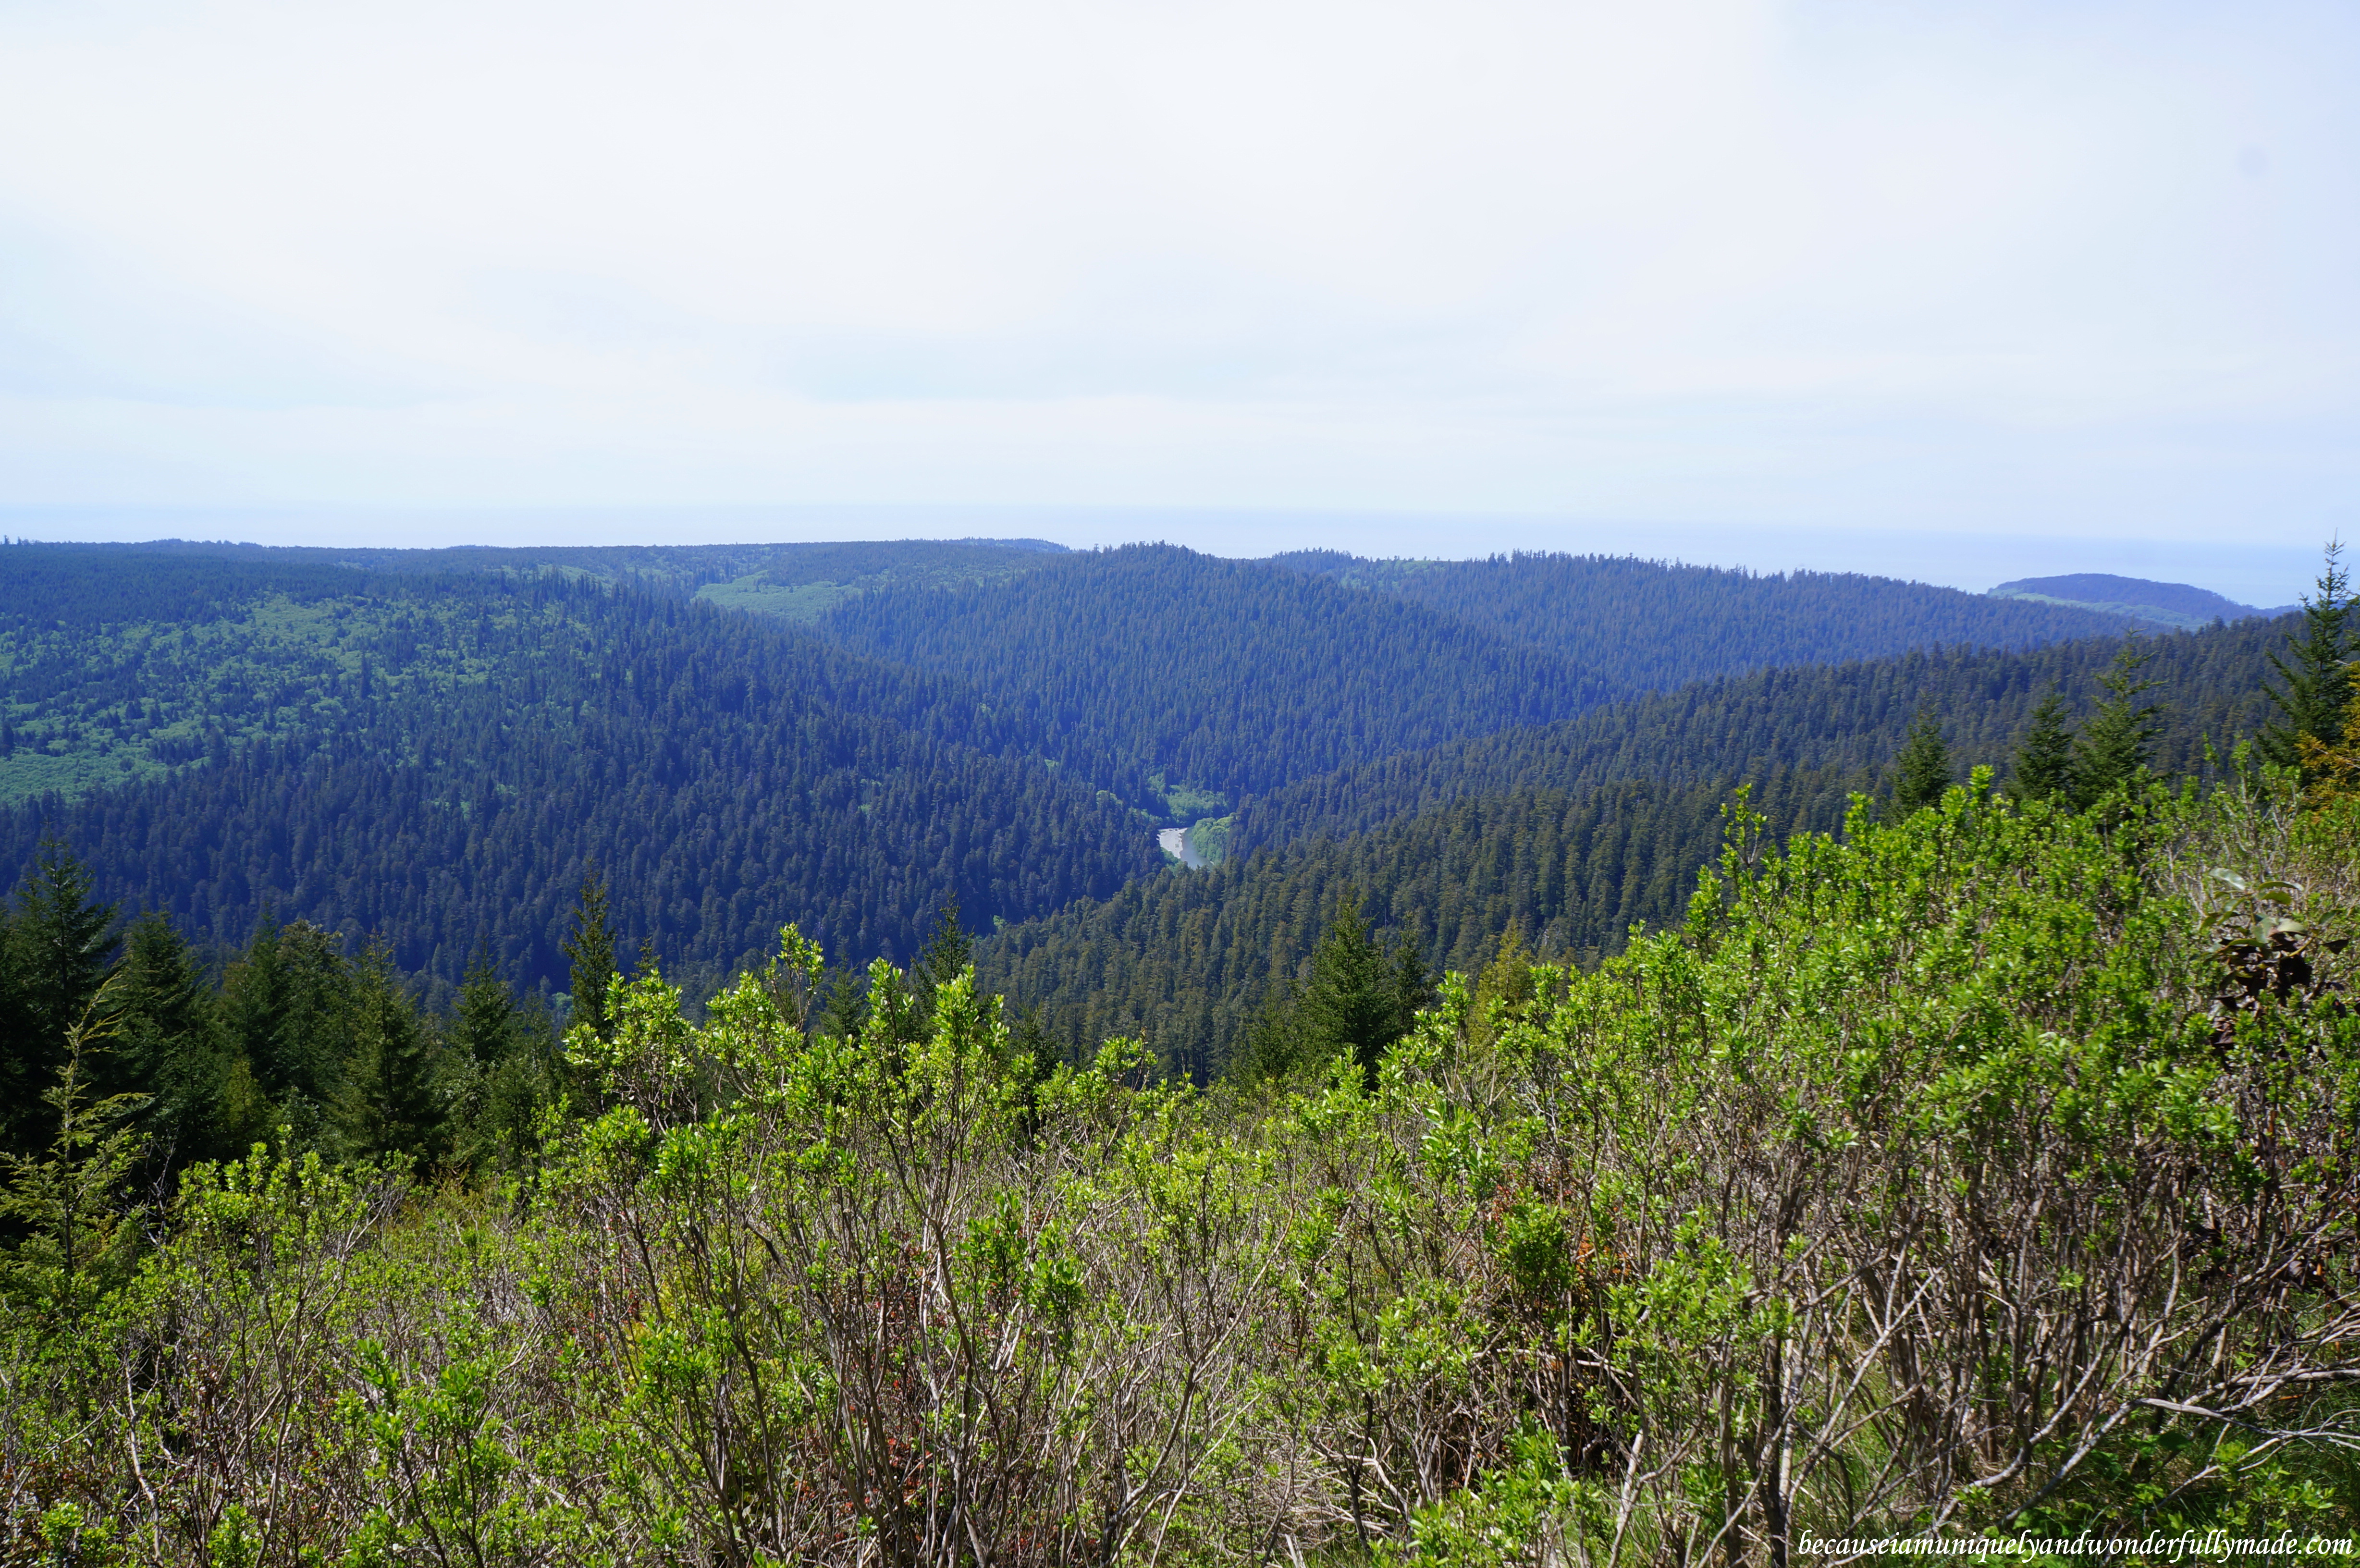 A panoramic view from the Redwood Creek Overlook offers a lookout to the Tall Trees Grove that hosts a former title-holder of world’s tallest tree. The Pacific Ocean can be in the distance.